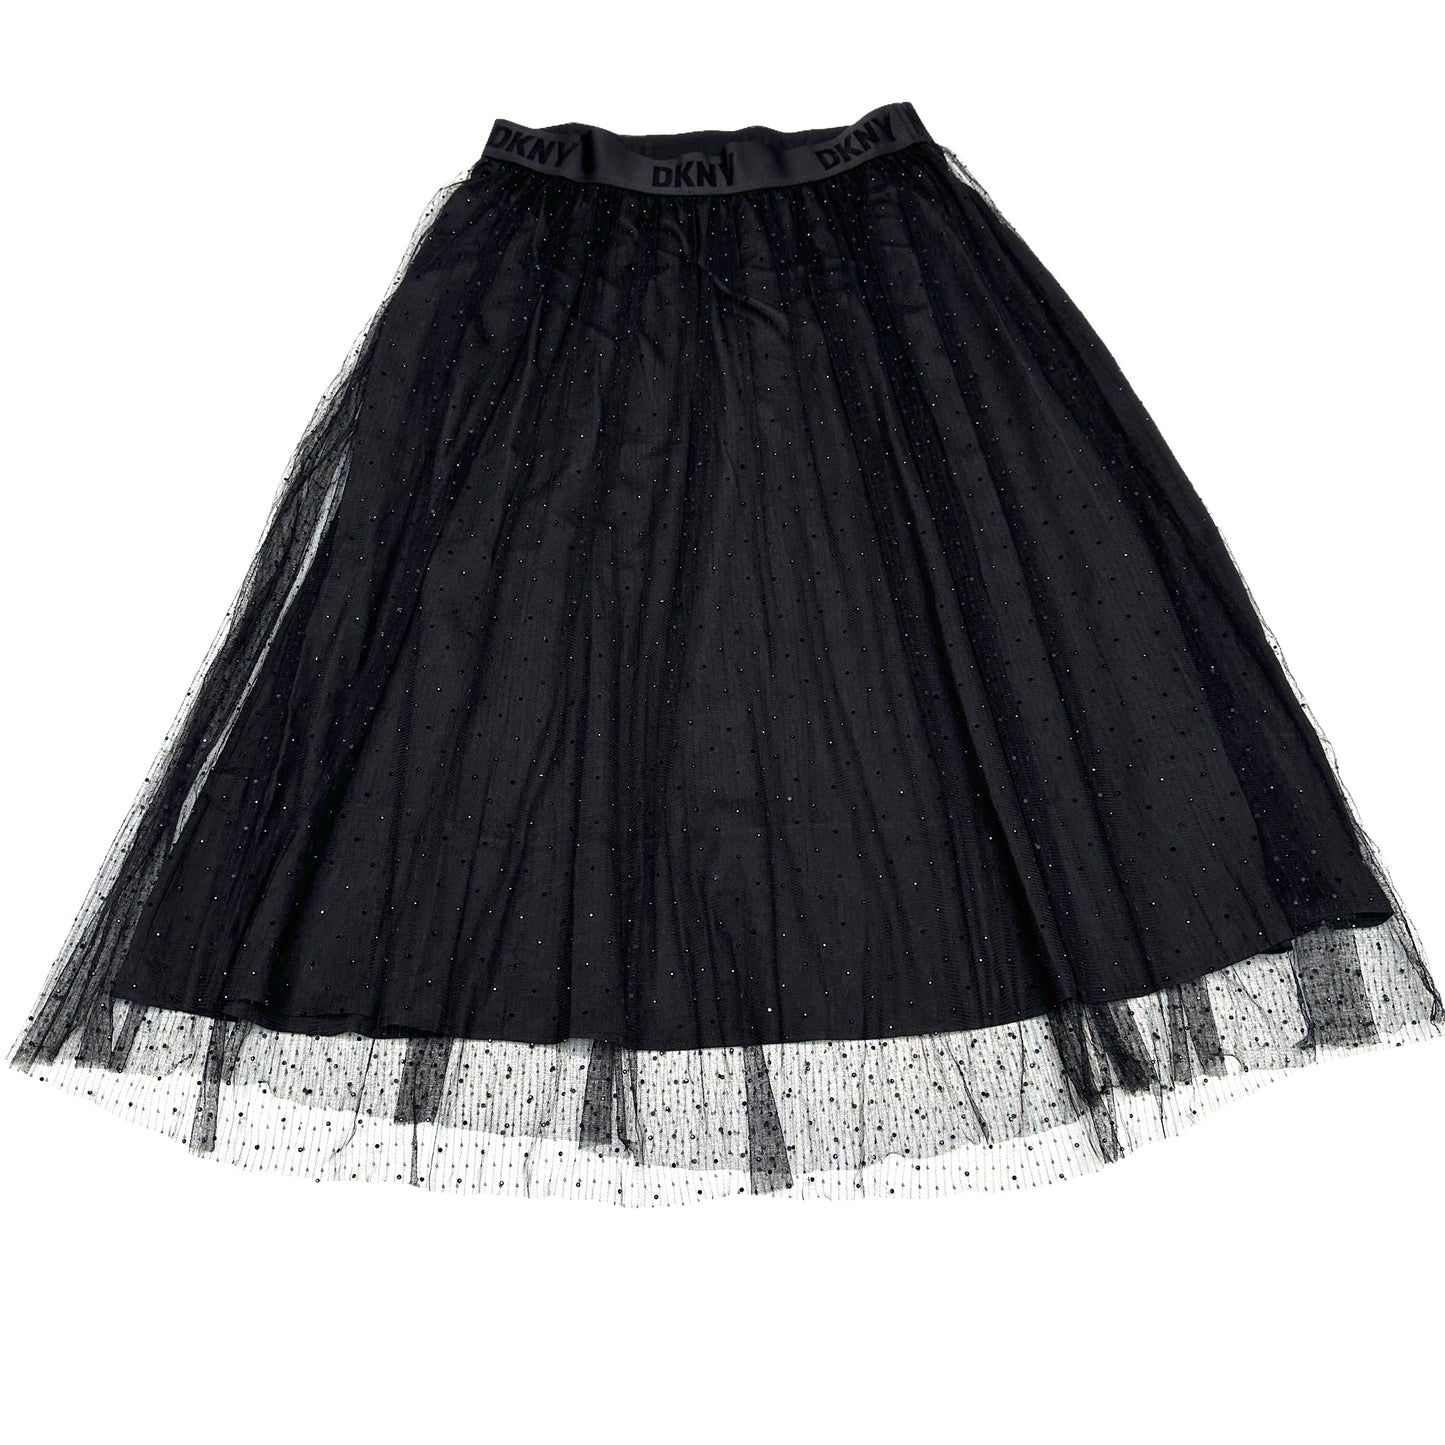 Black Tulle Skirt w/Crystals - M